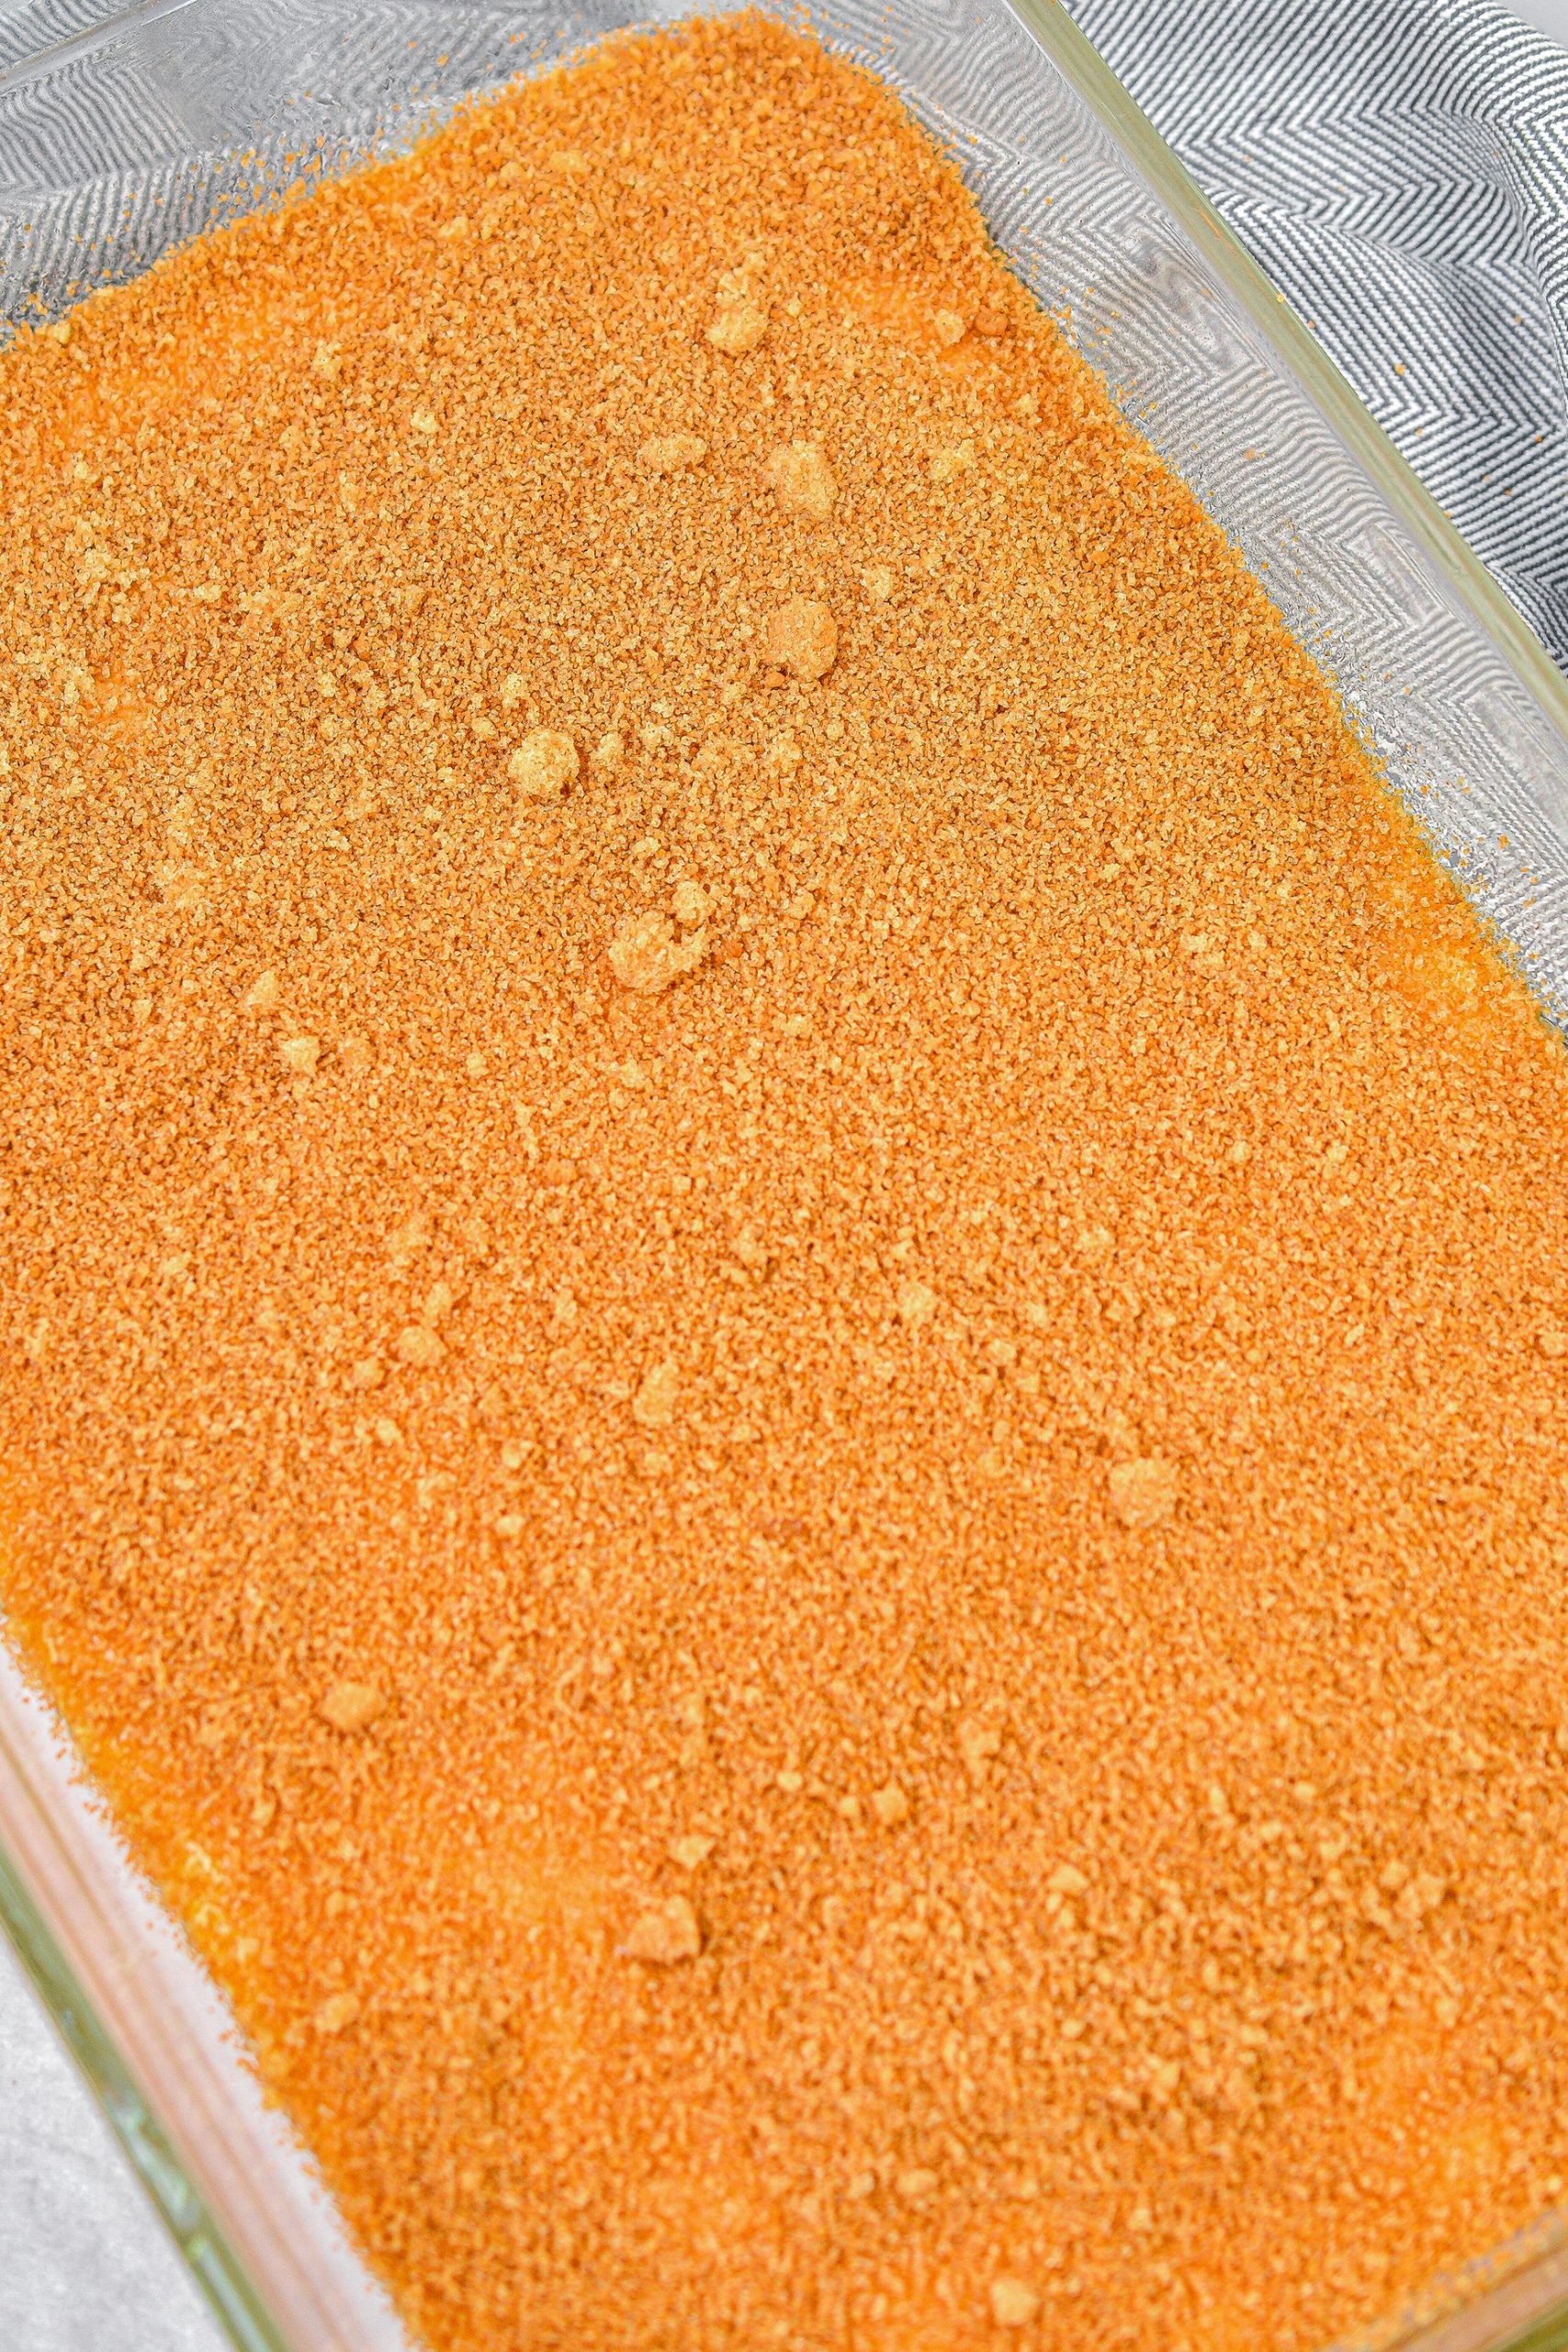 Sprinkle the cinnamon-sugar mixture over the cake batter in the casserole dish.